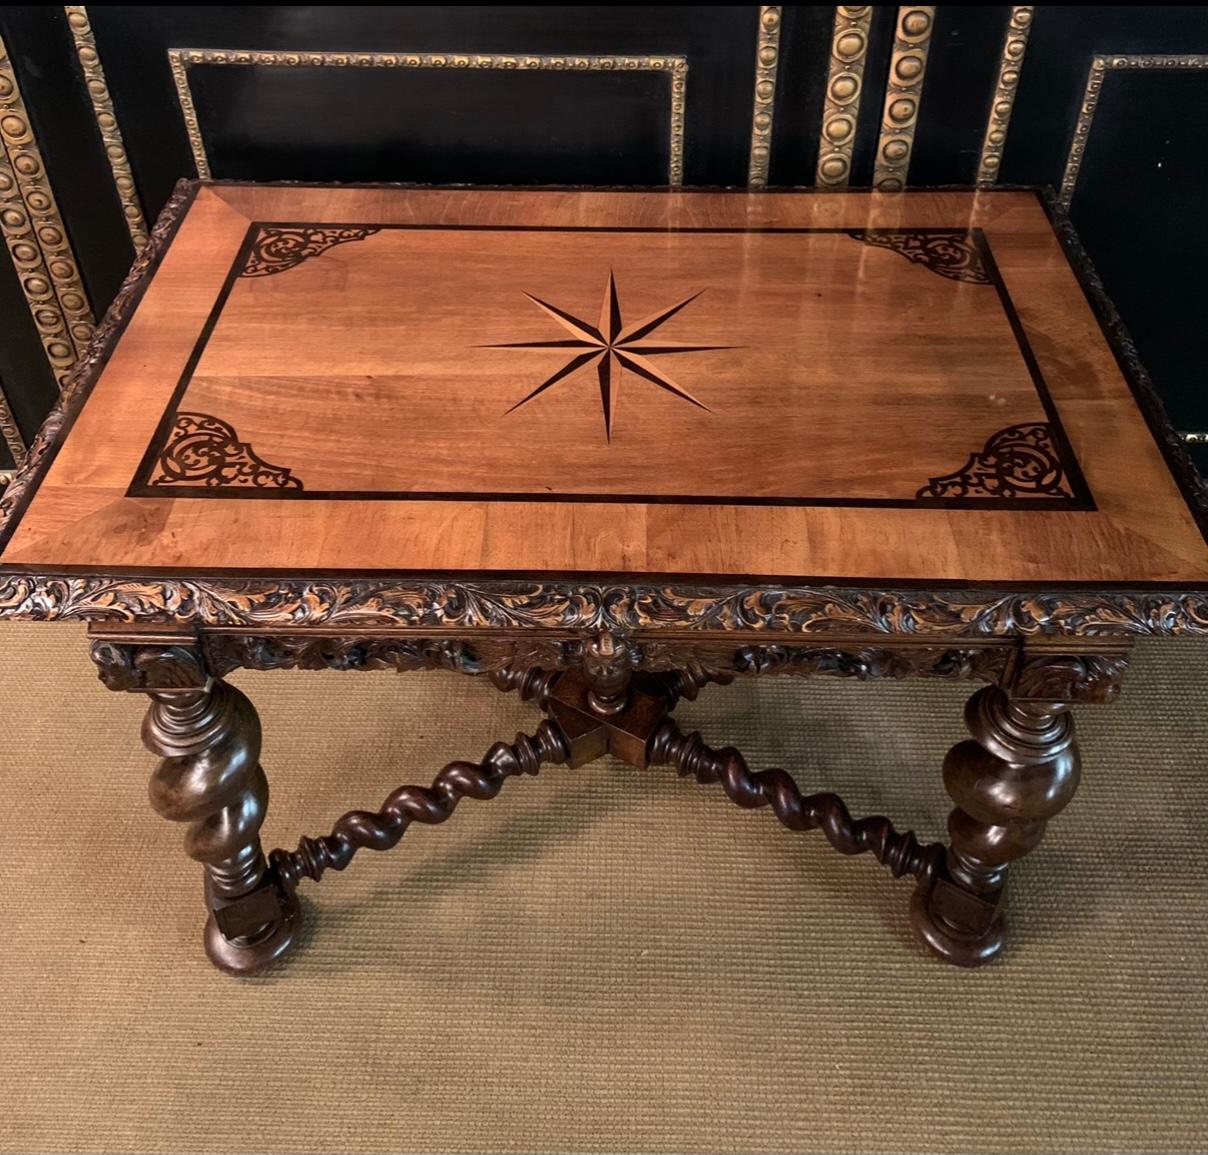 We offer a unique Neo Renaissance / Gdansk Baroque table.

The table stood in the entrance of a magnificent villa in the posh district of Grunewald for over 70 years.
Here are the original black and white photos of the table.

Solid oak with relief